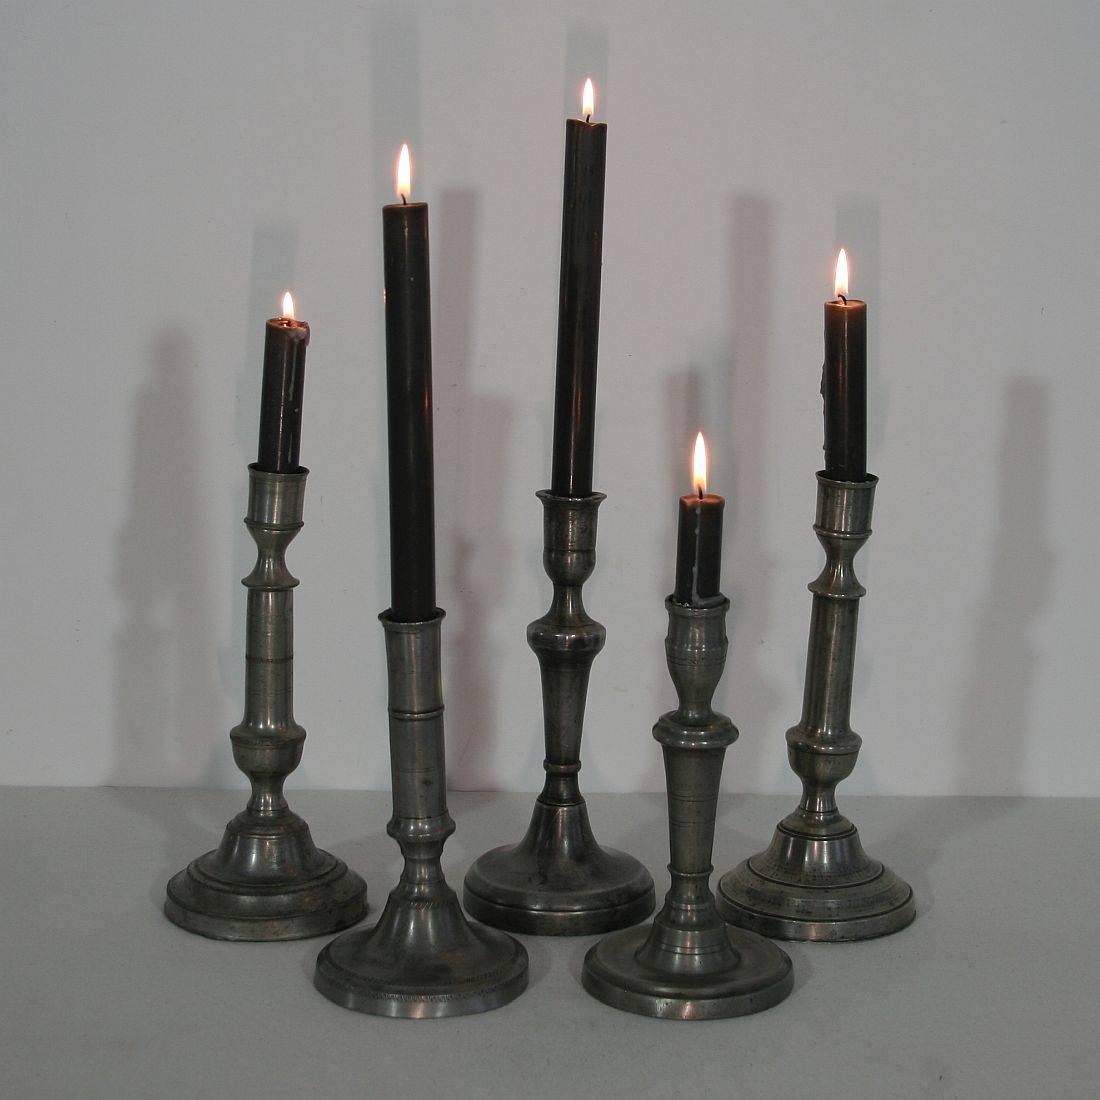 Amazing collection of five pewter candlesticks. They are all different and unique.
France, circa 1750-1850.
Weathered, dented and small losses but these imperfections help authenticate these items as they were utilitarian type pieces
Measures: H